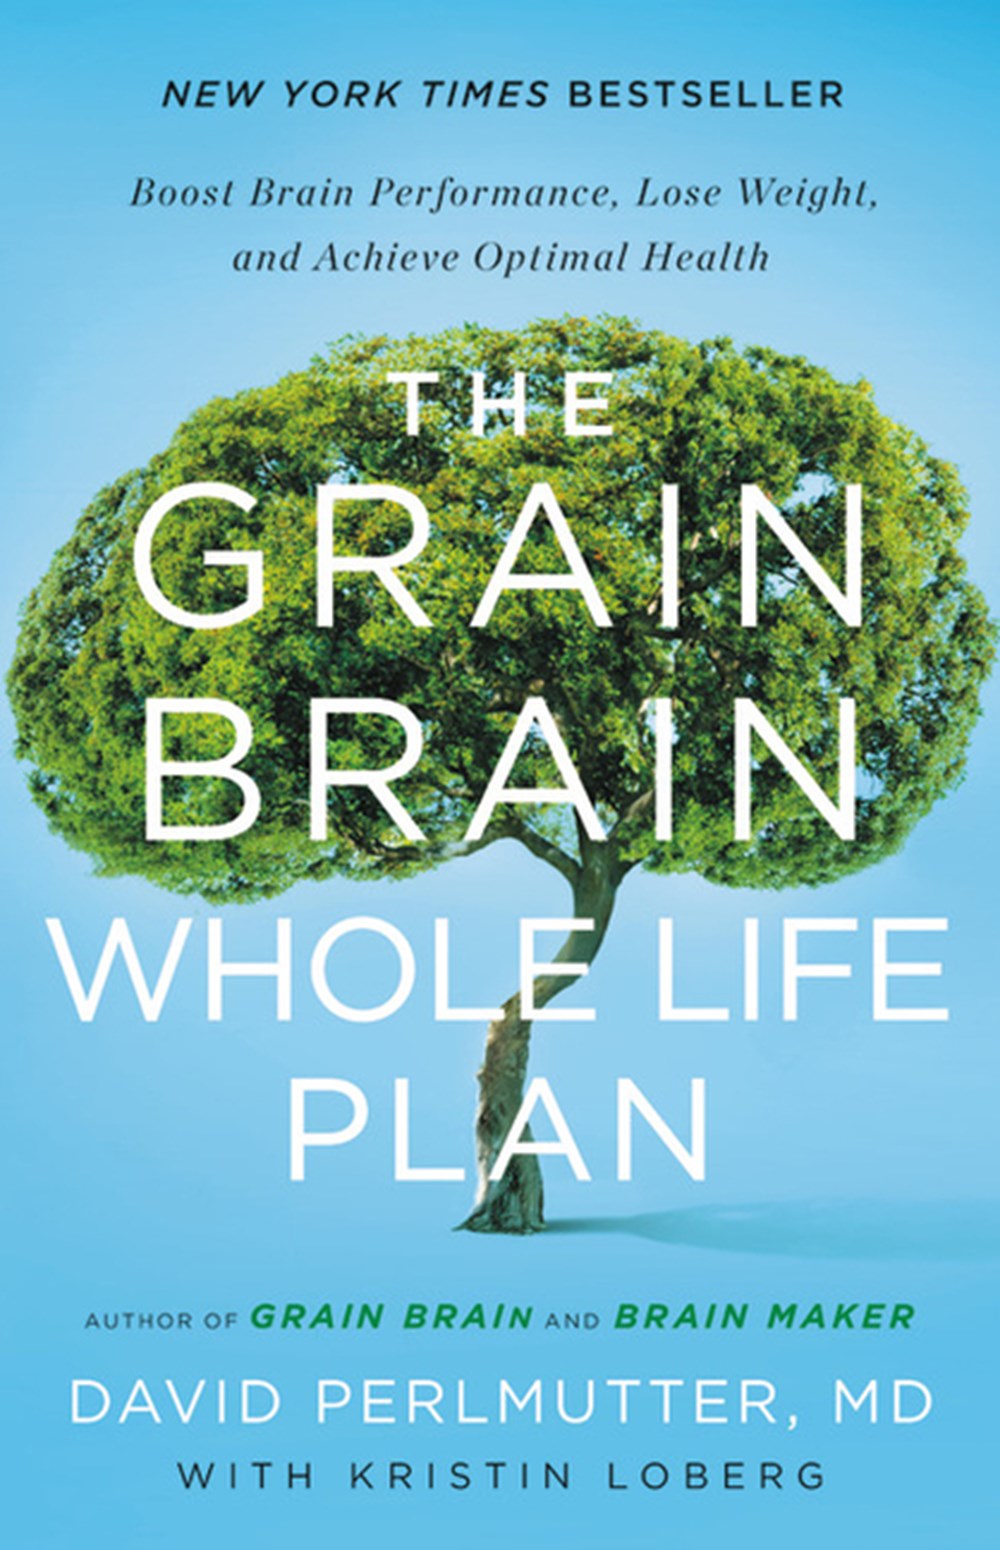 Grain Brain Whole Life Plan Boost Brain Performance, Lose Weight, and Achieve Optimal Health